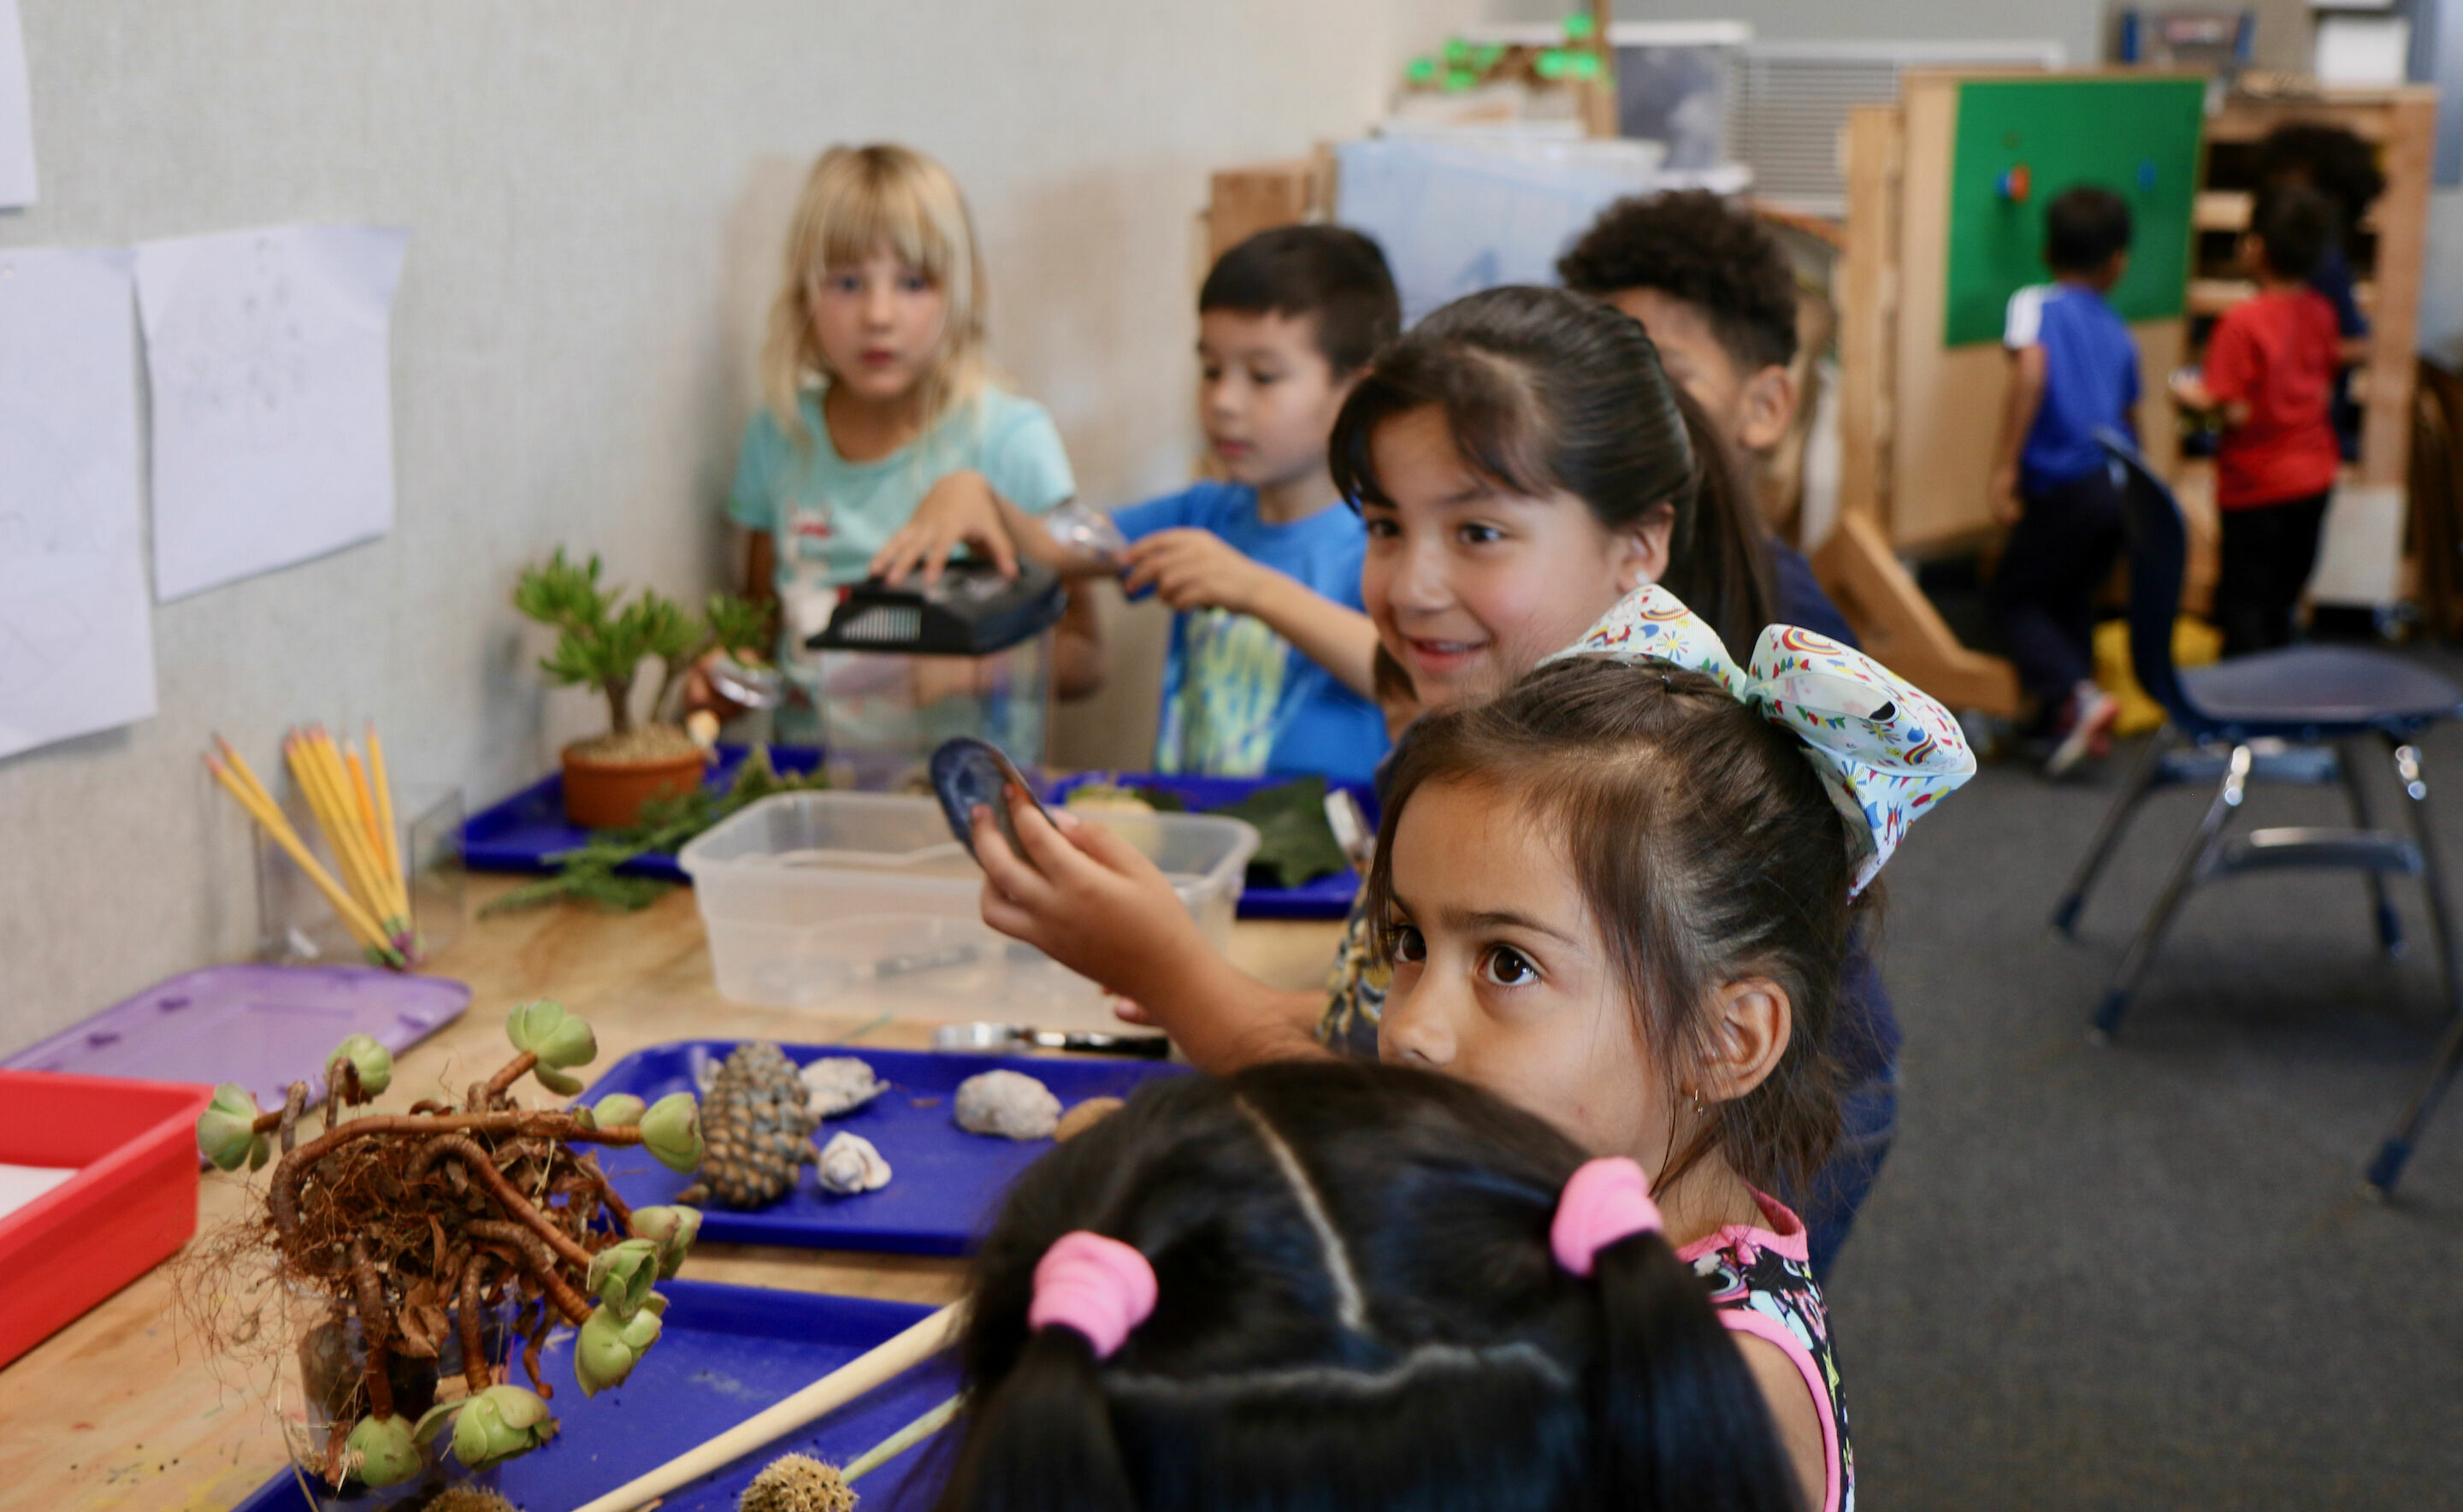 kindergarten girls and boys gather at a table to see and touch items from nature, like leaves, pine cones, and more.